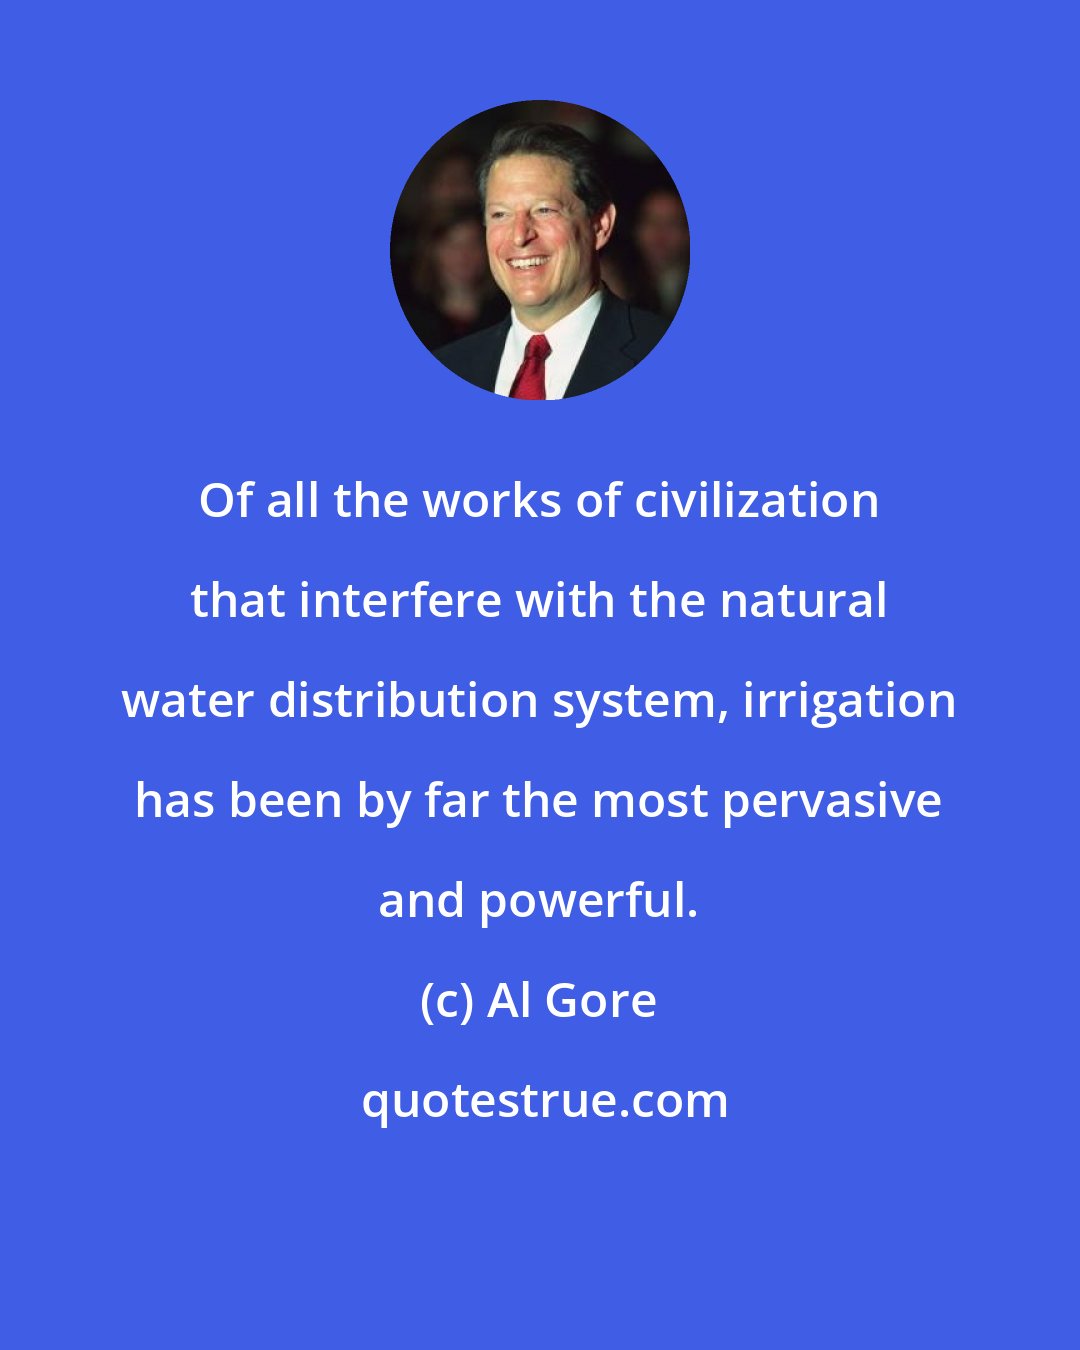 Al Gore: Of all the works of civilization that interfere with the natural water distribution system, irrigation has been by far the most pervasive and powerful.